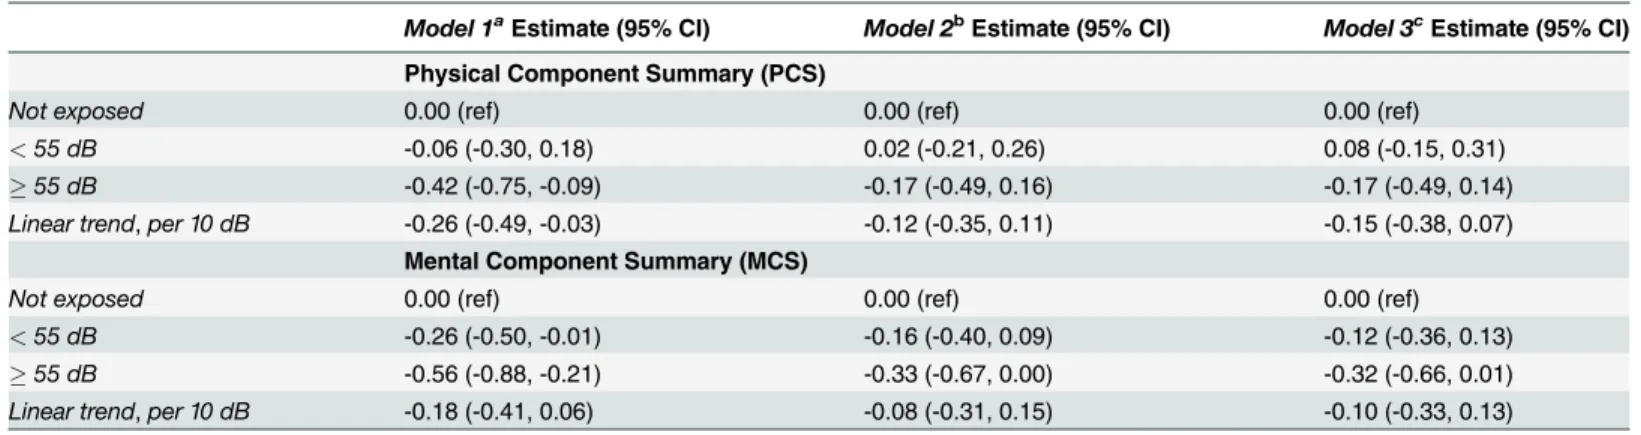 Table 4. Association between railway noise exposure at time of SF-36 and PCS/MCS.